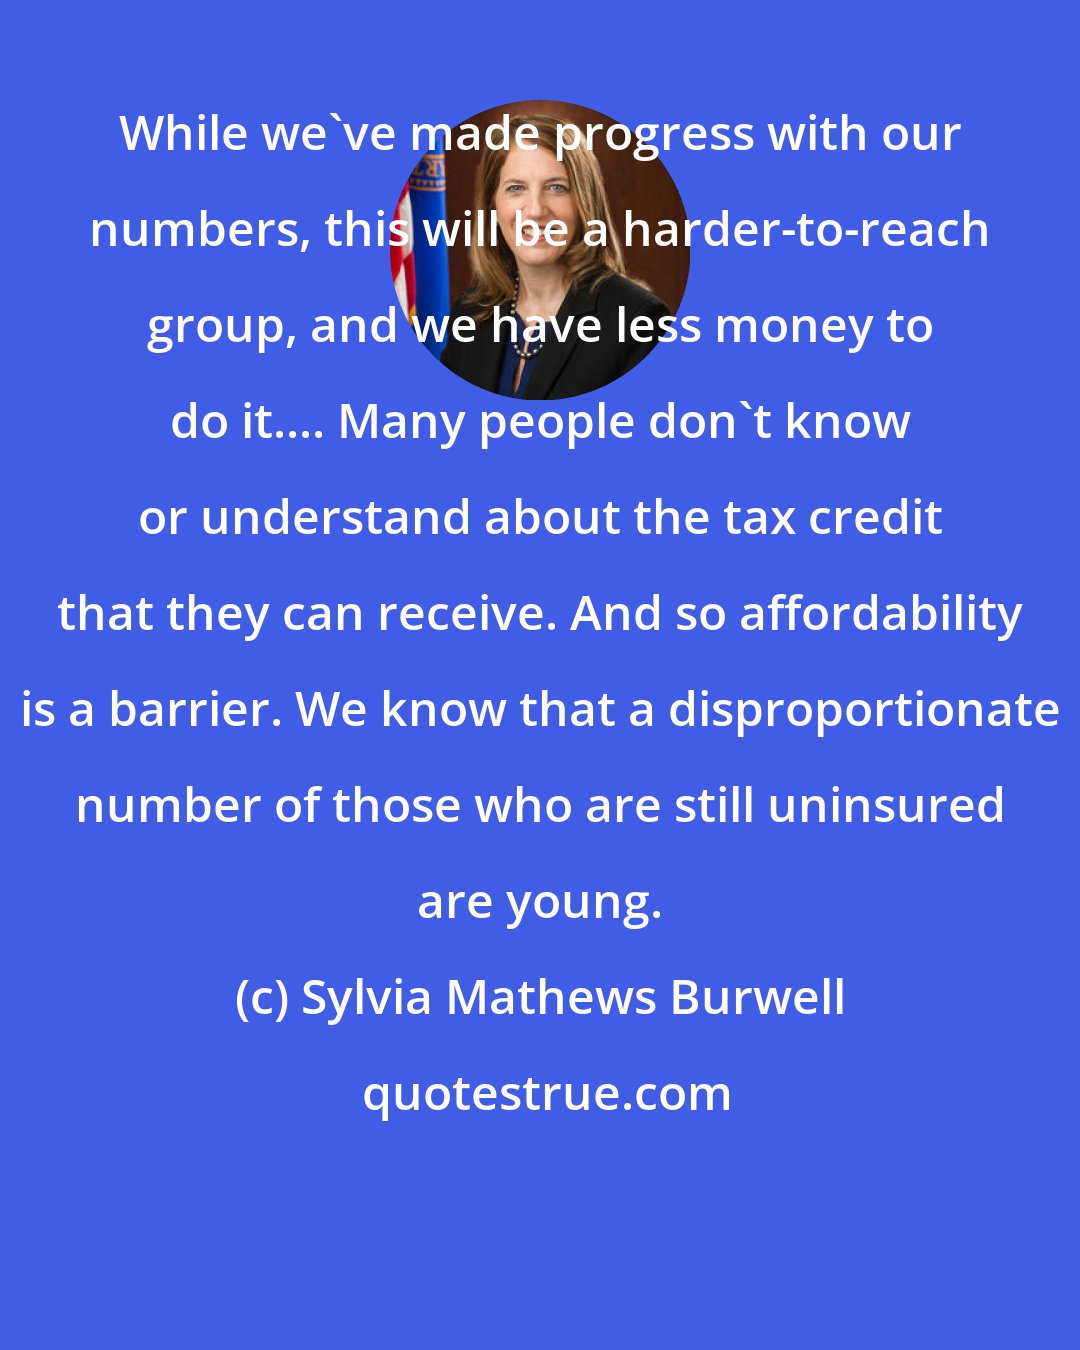 Sylvia Mathews Burwell: While we've made progress with our numbers, this will be a harder-to-reach group, and we have less money to do it.... Many people don't know or understand about the tax credit that they can receive. And so affordability is a barrier. We know that a disproportionate number of those who are still uninsured are young.